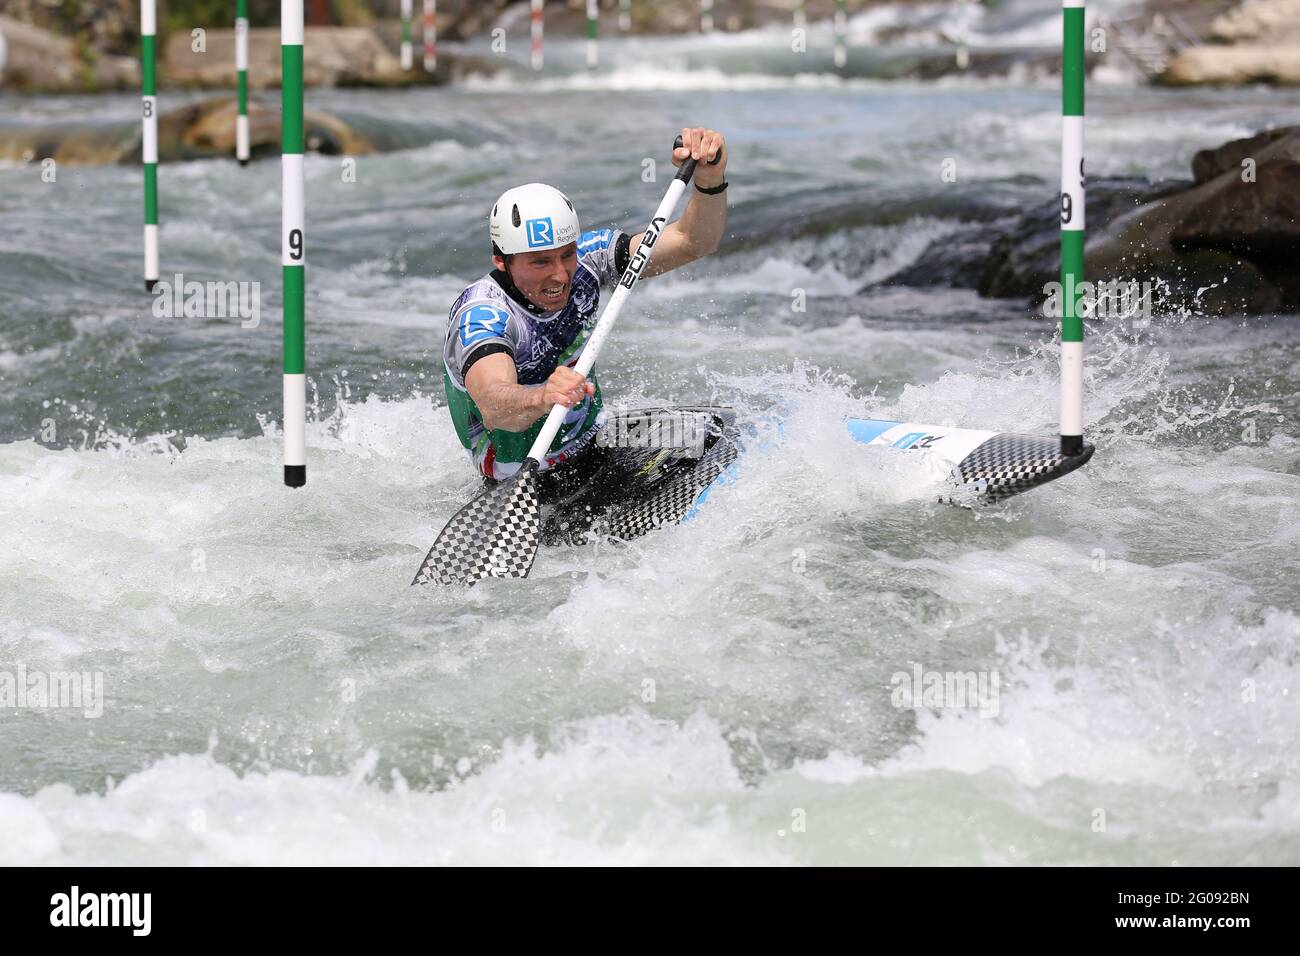 David FLORENCE of Great Britain competes in the Men's Canoe (C1) semifinals during the ECA Canoe Slalom European Championships on the Dora Baltea rive Stock Photo